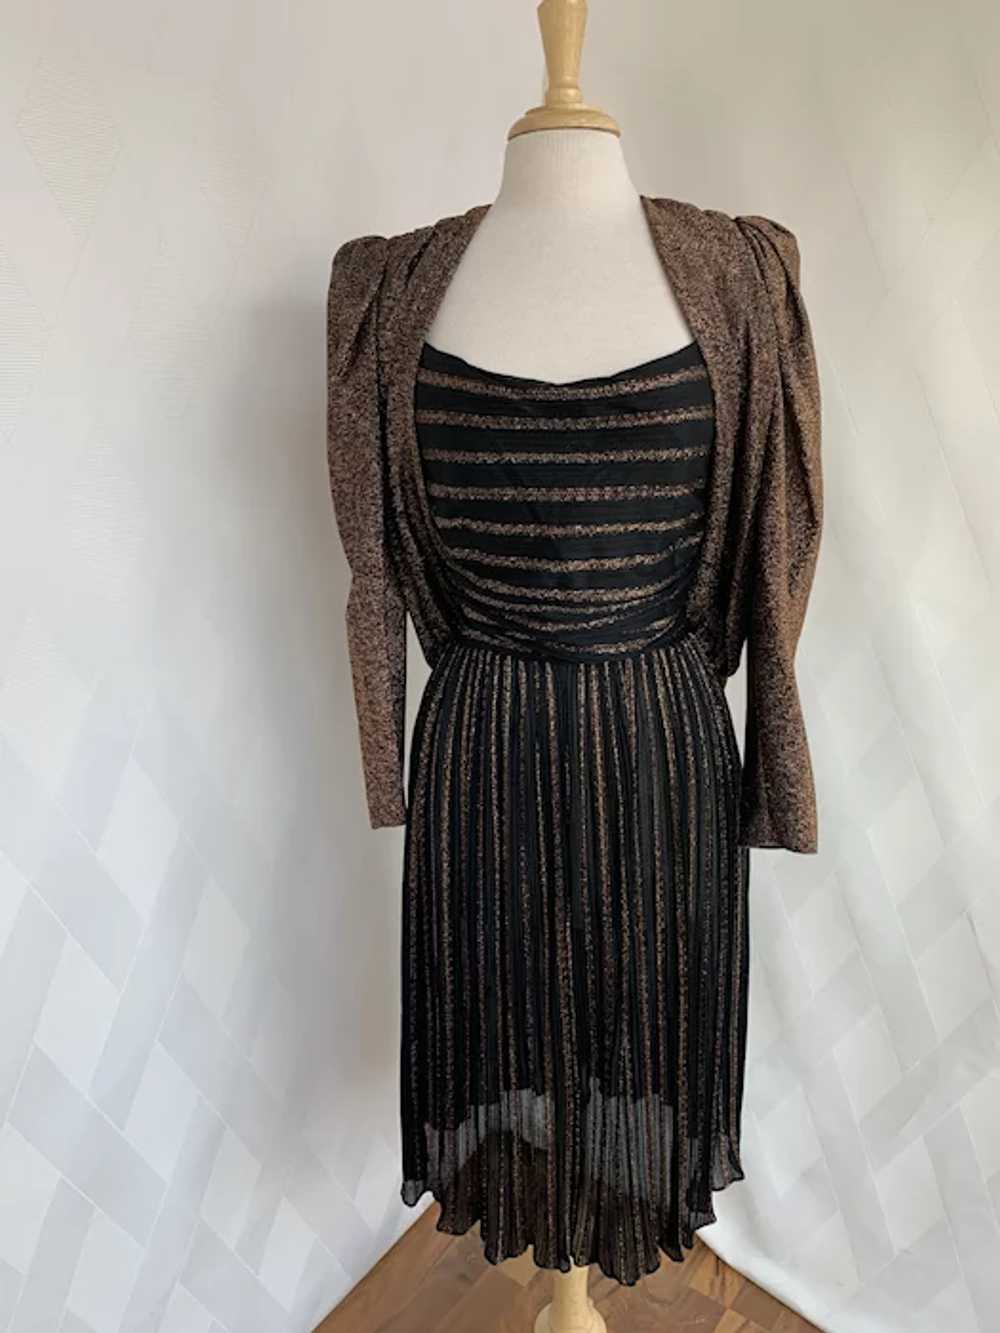 1980s Strappy, Copper Metallic Dress with Jacket - image 6